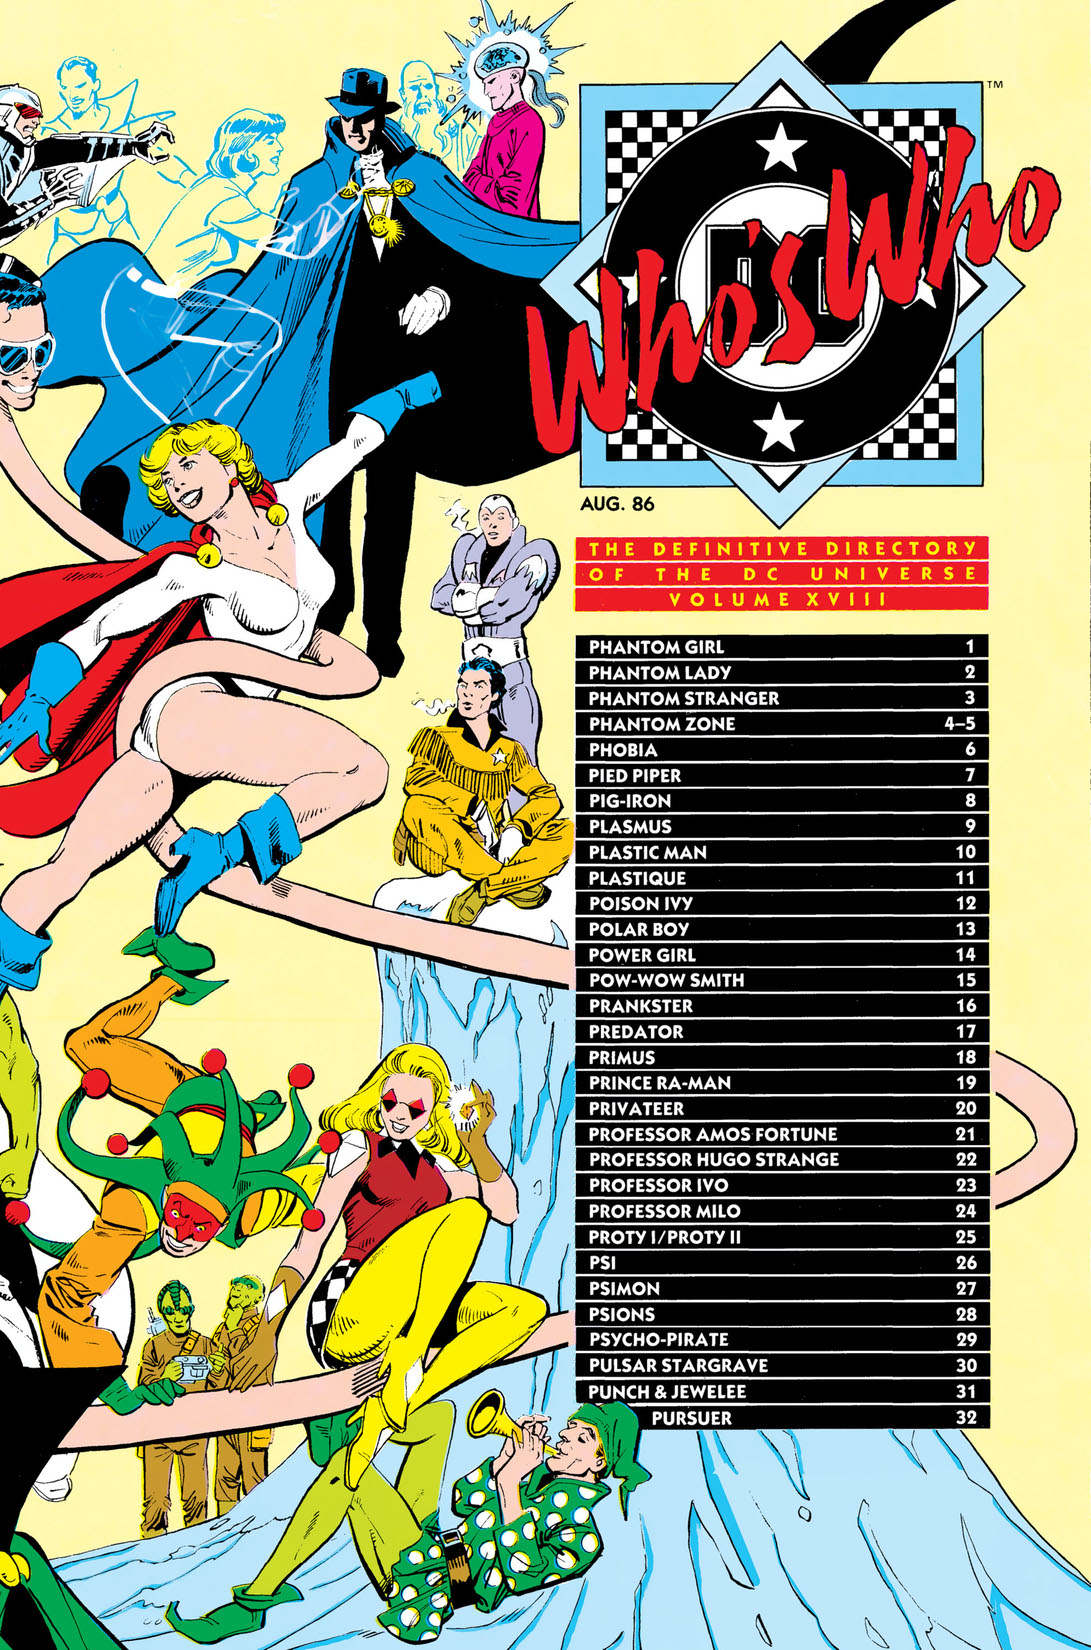 Who's Who: The Definitive Directory of the DC Universe #18 preview images